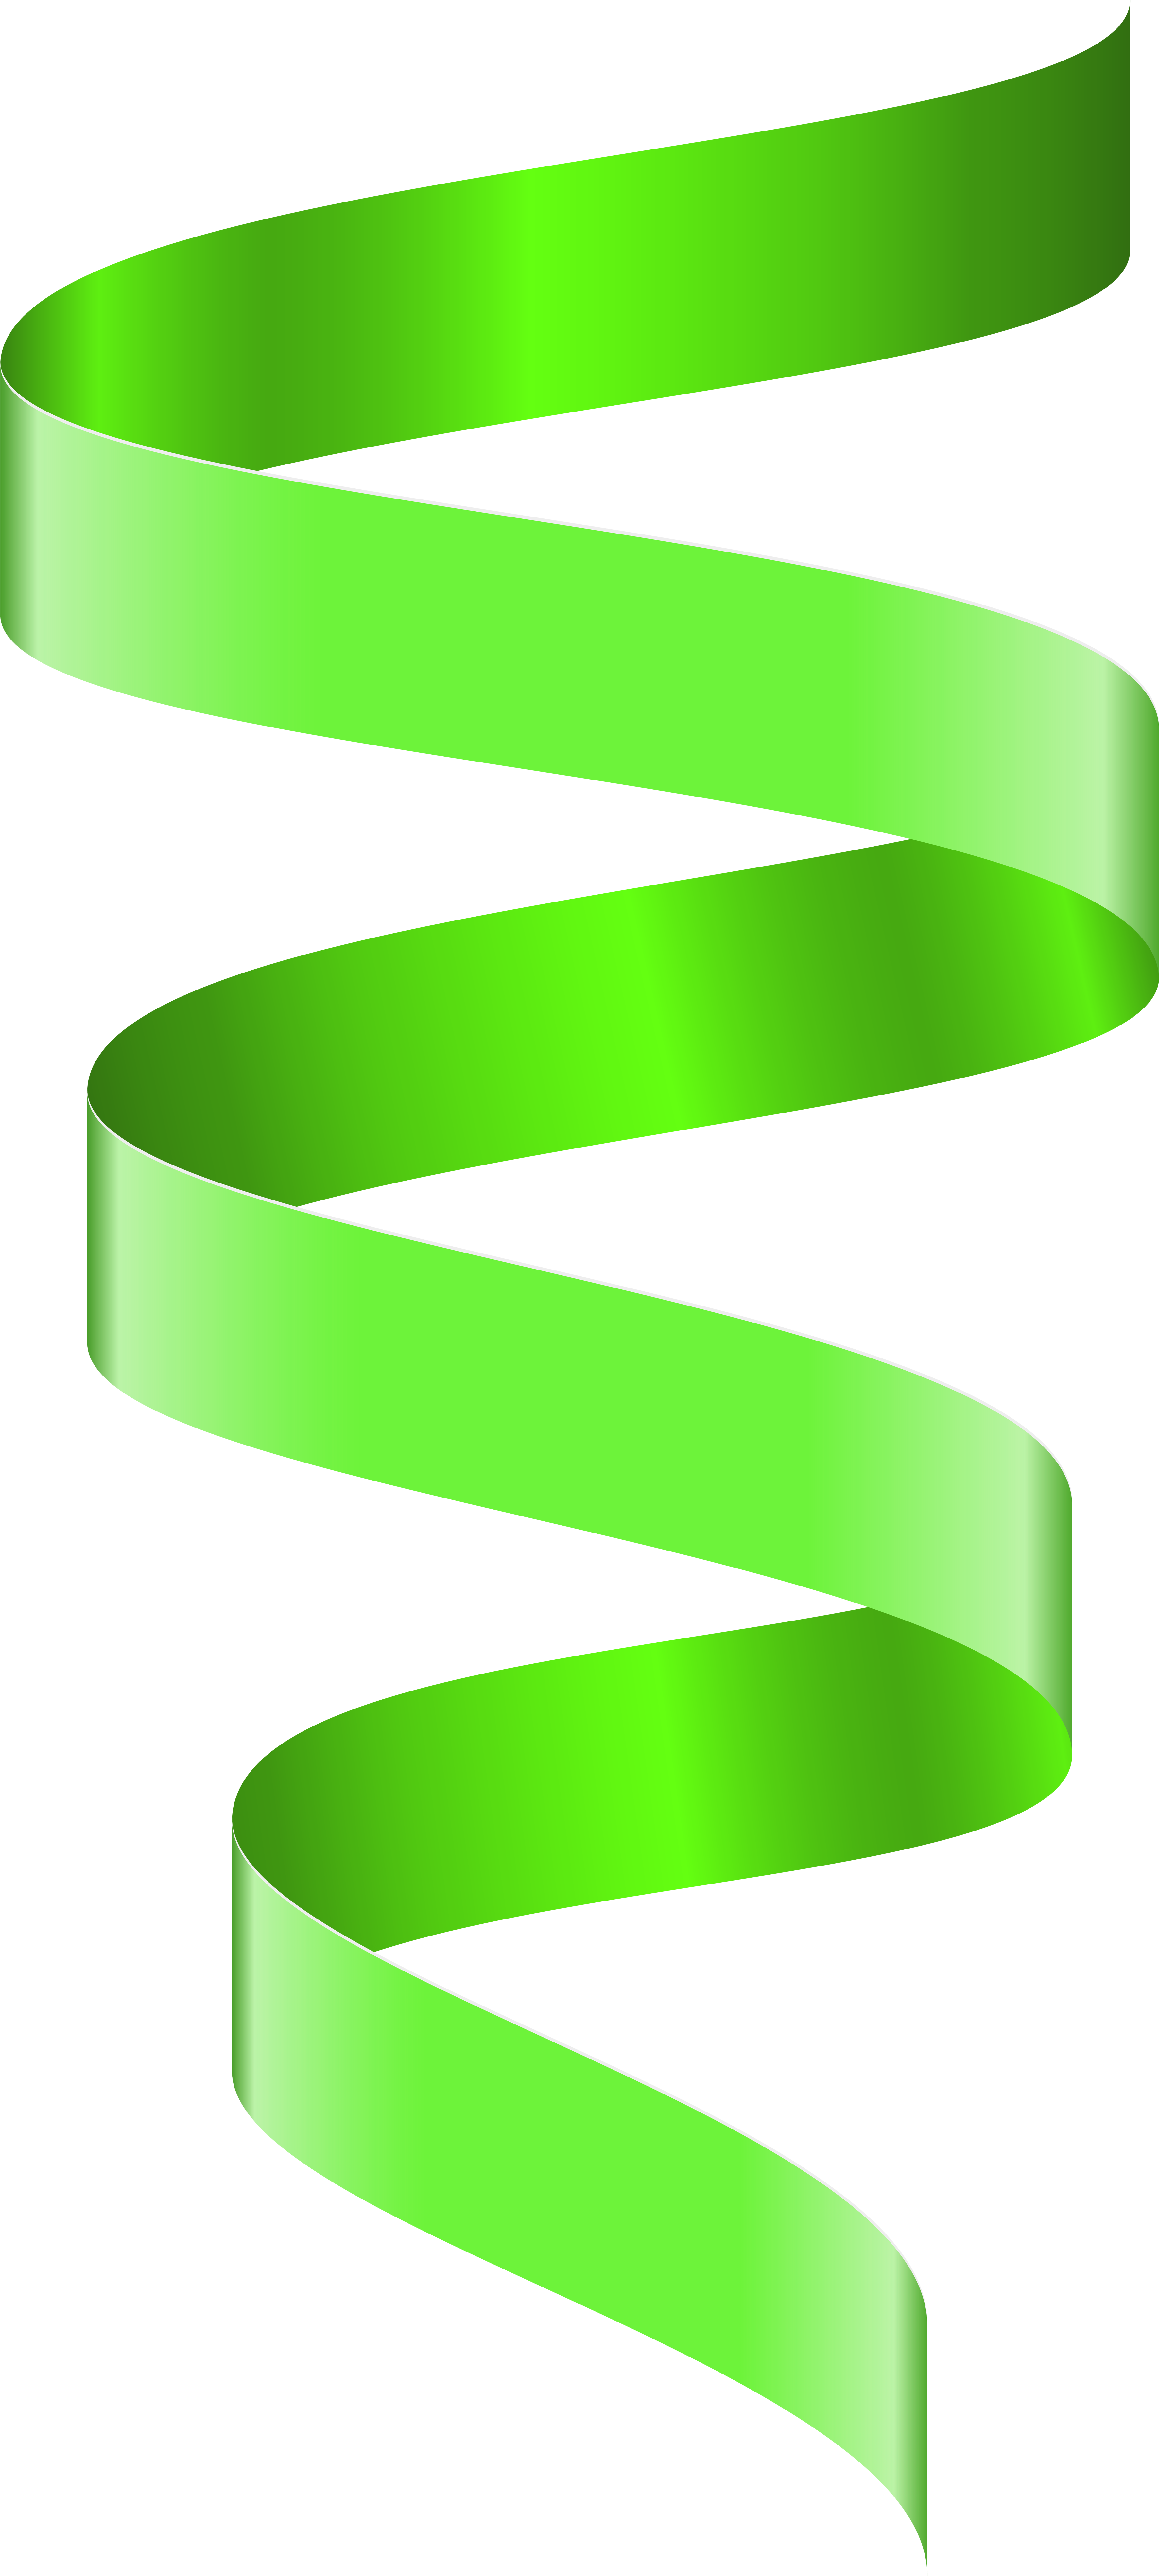 A Green Ribbon On A Black Background